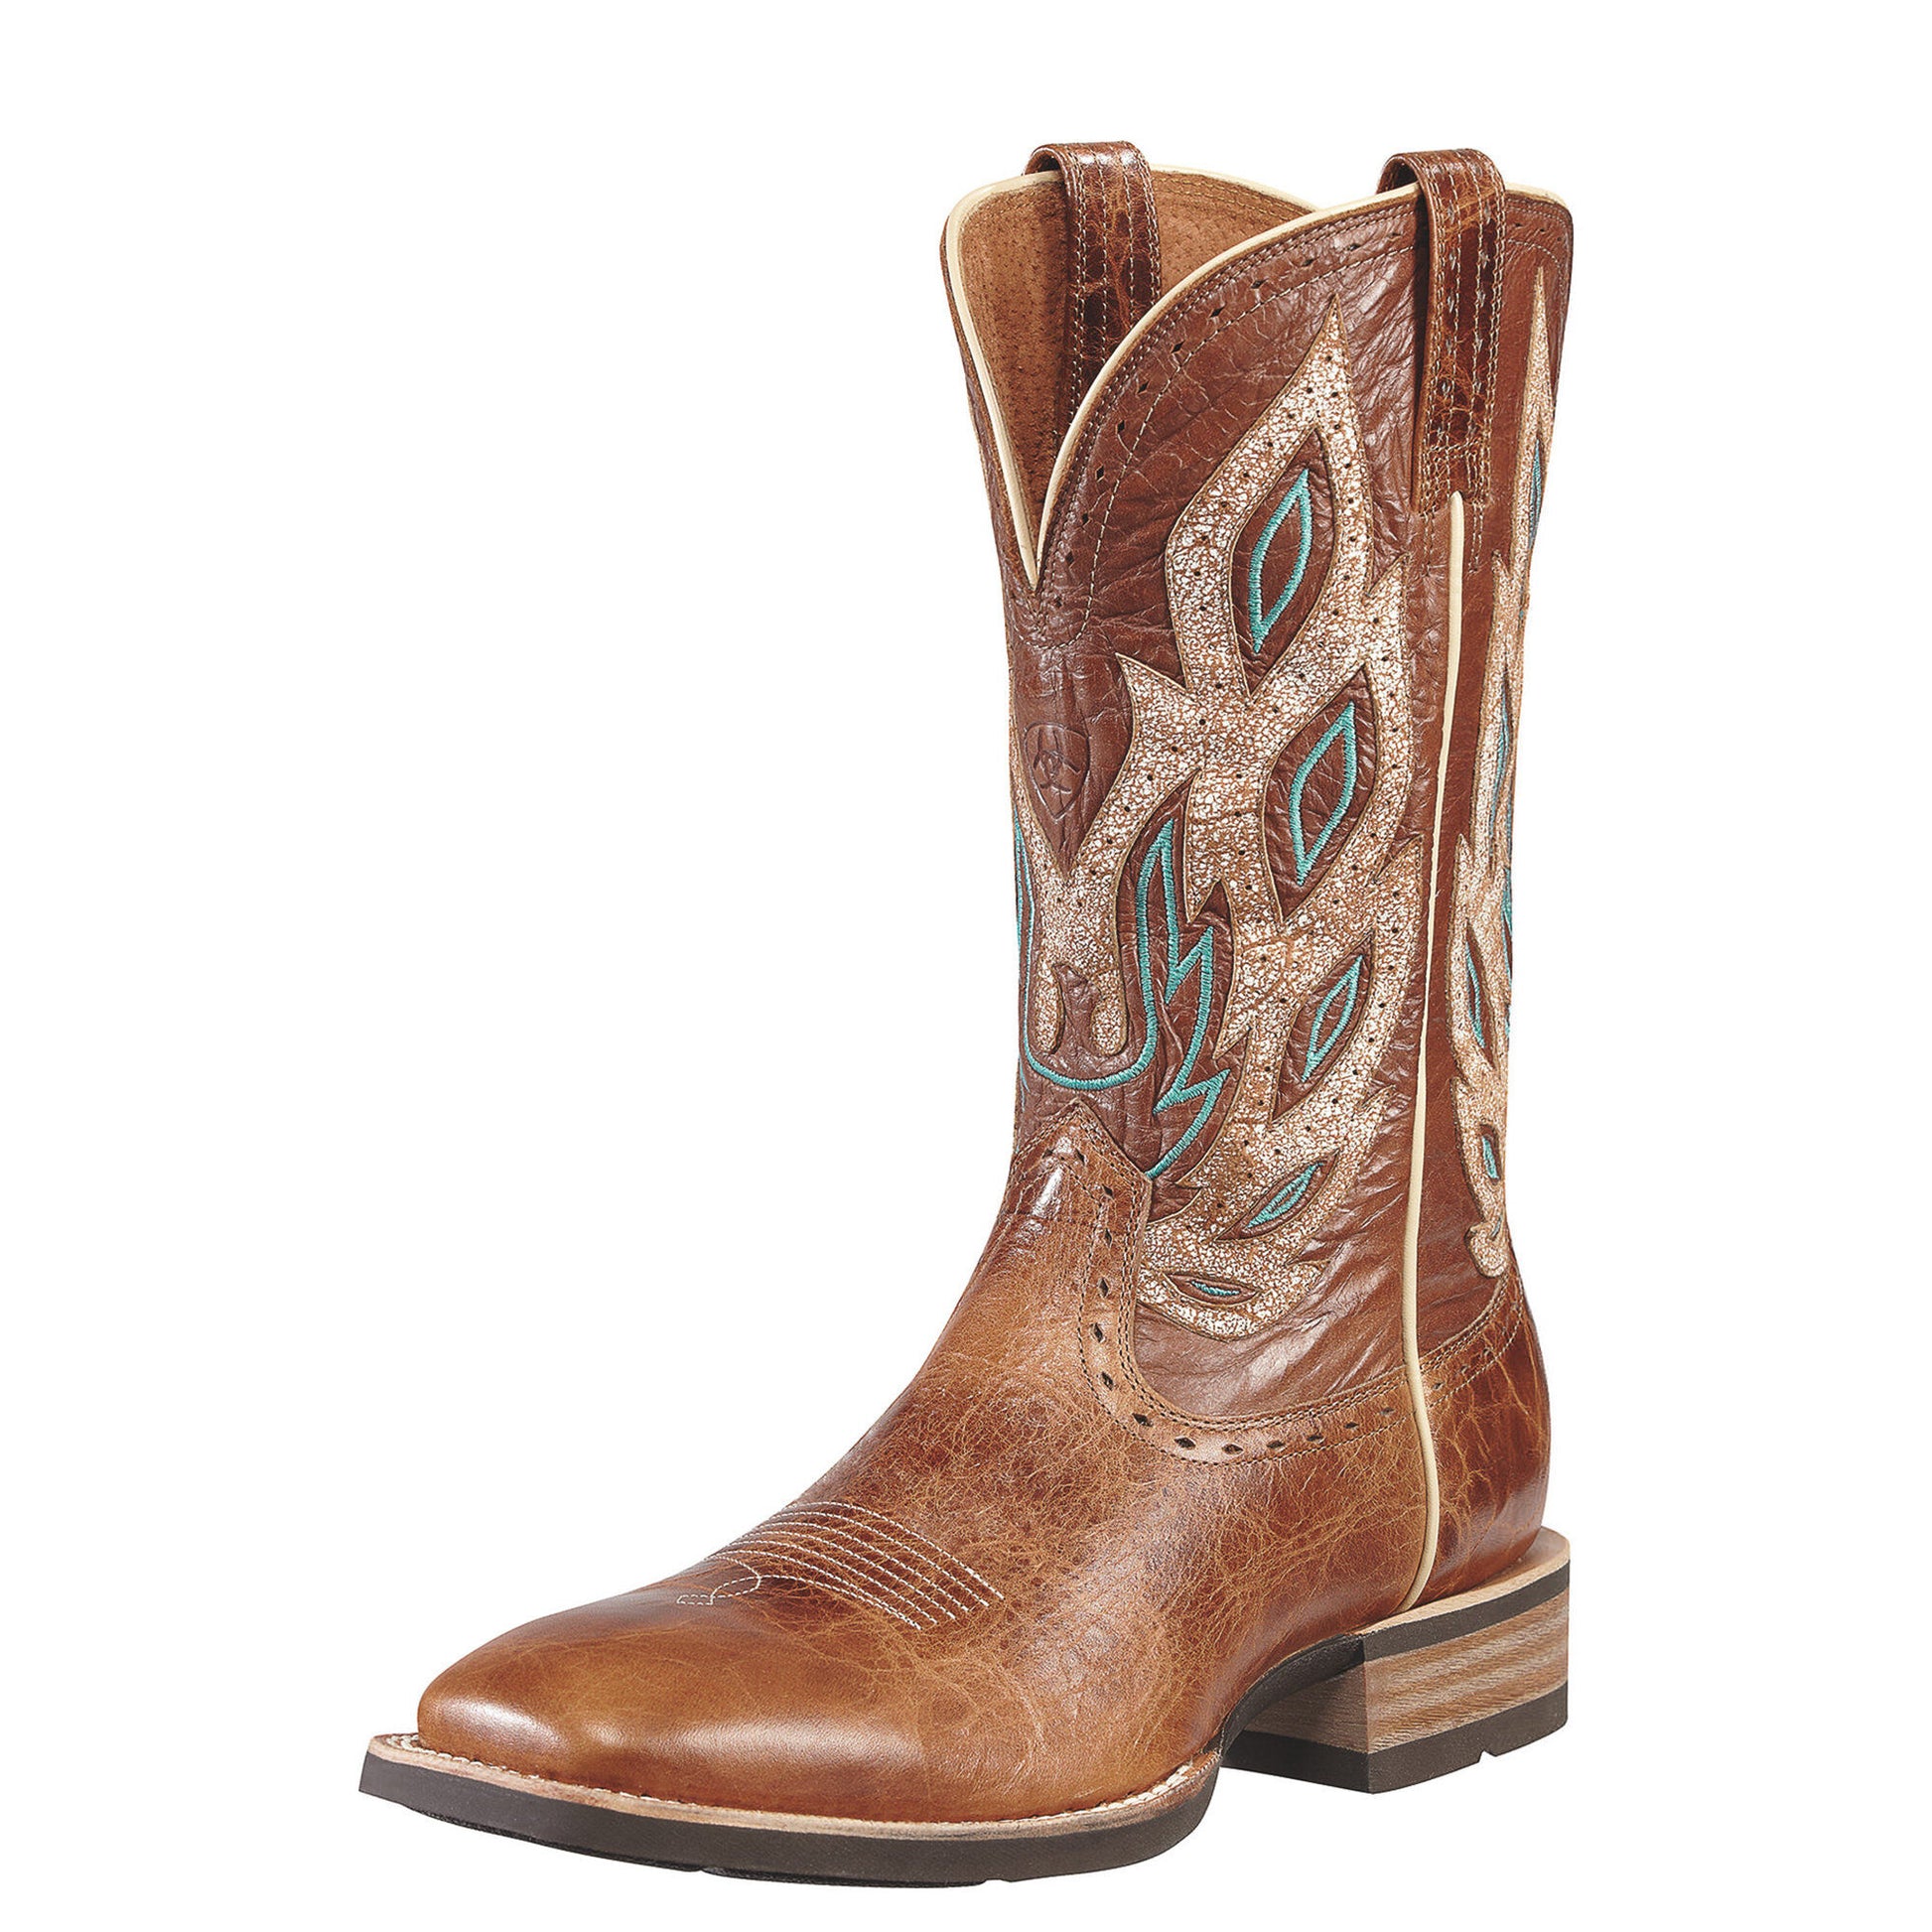 Ariat Men's Nighthawk Boot - Beasty Brown - French's Boots